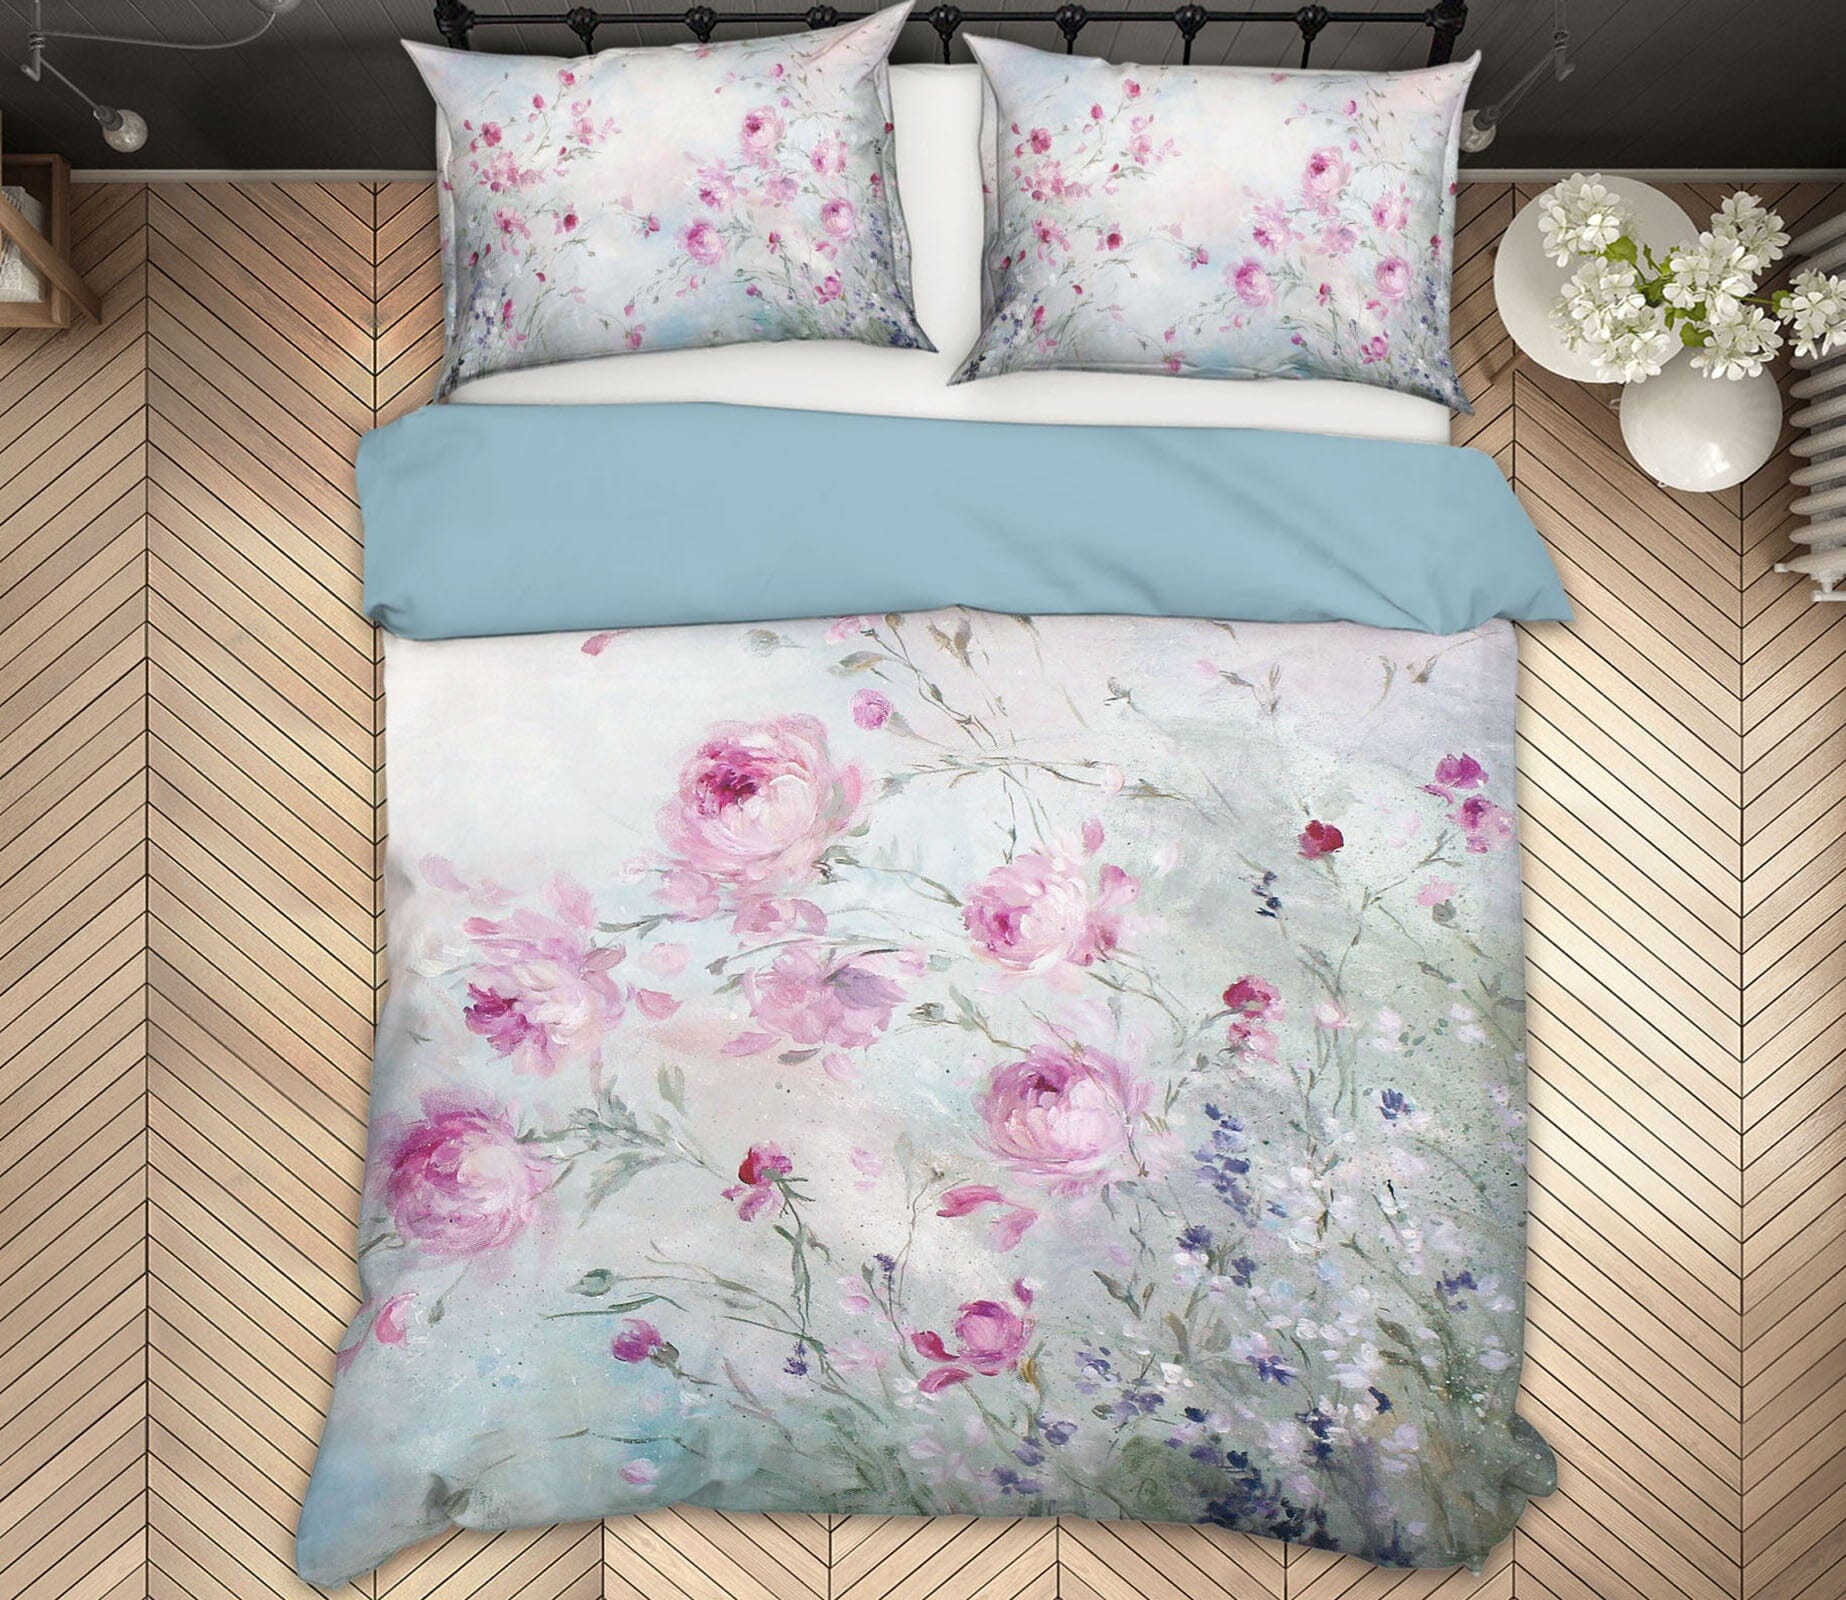 3D Rose Bunch 037 Debi Coules Bedding Bed Pillowcases Quilt Quiet Covers AJ Creativity Home 